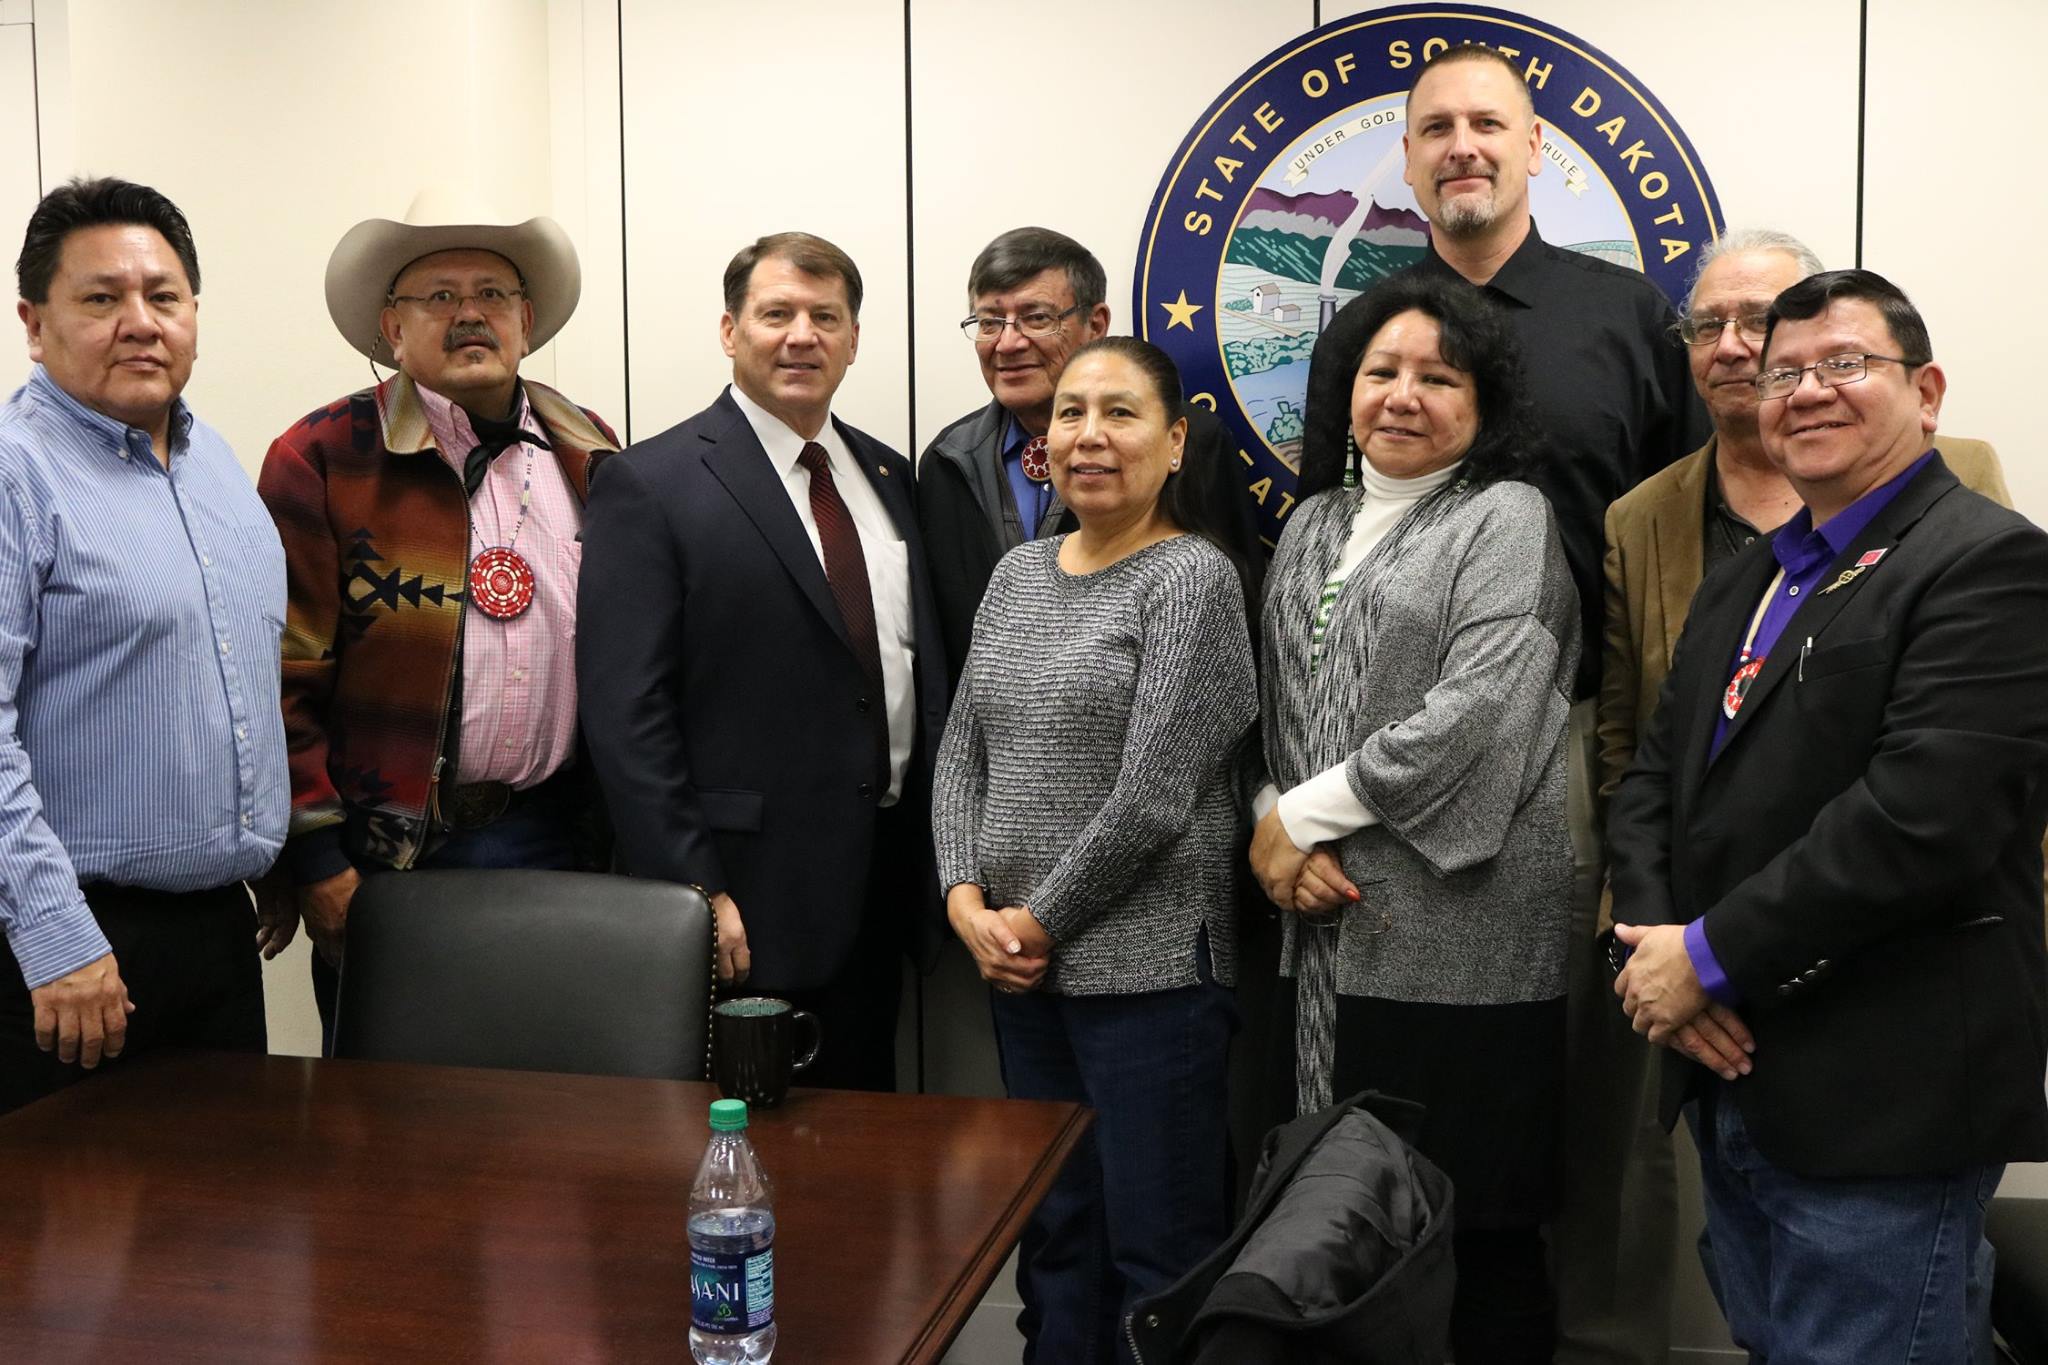 Bill aims to restore some 'RESPECT' in dealings with Native people